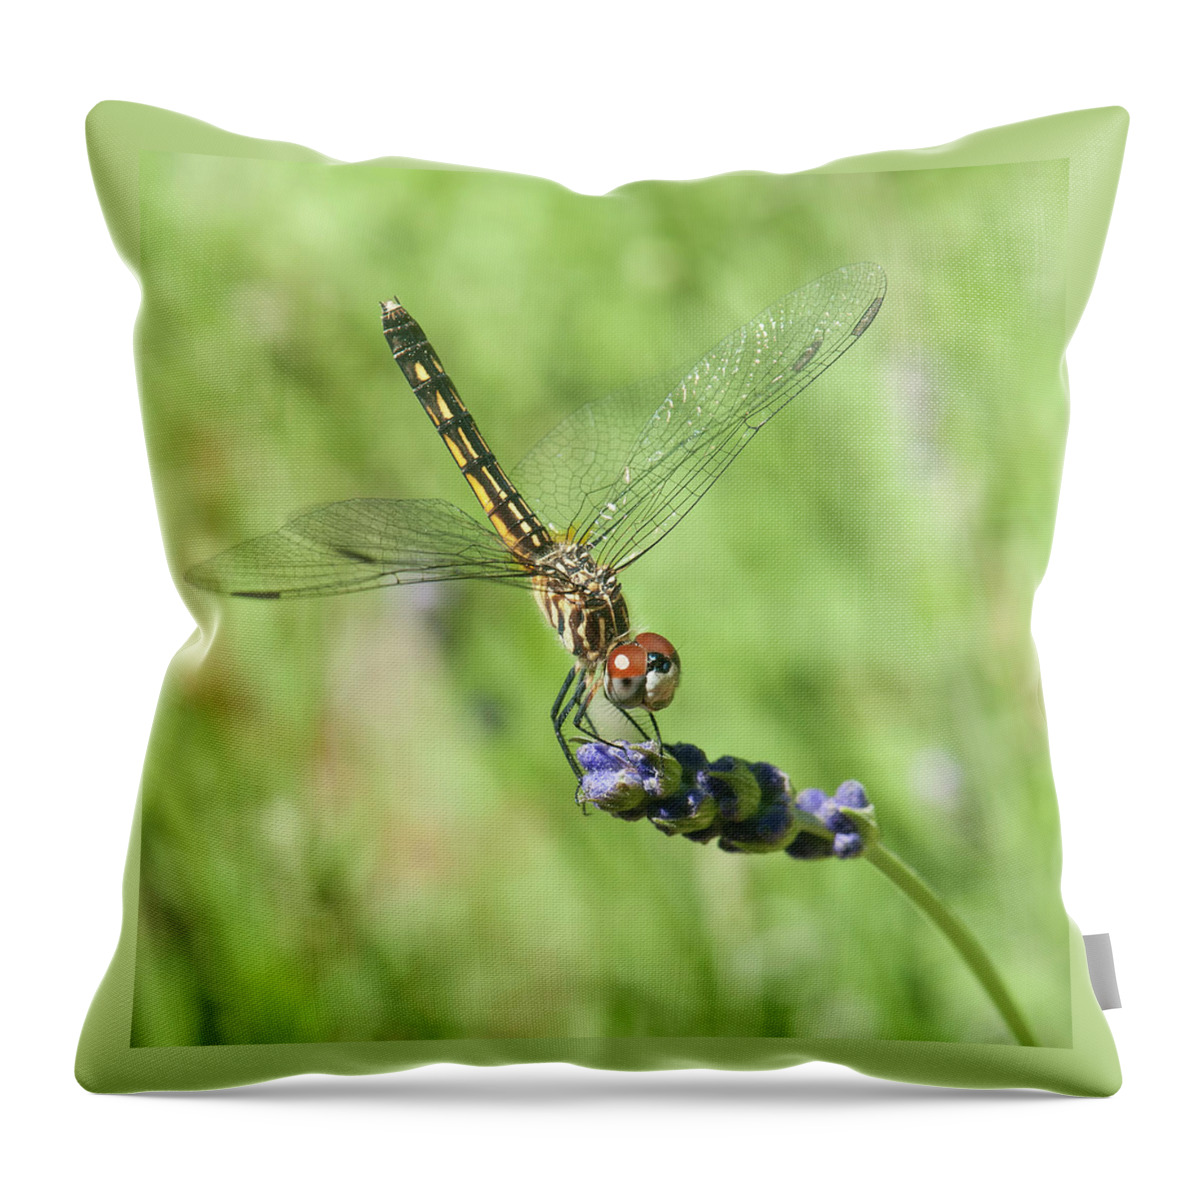 Dragon Fly Throw Pillow featuring the photograph A Taste Of Lavender by Jean-Pierre Ducondi